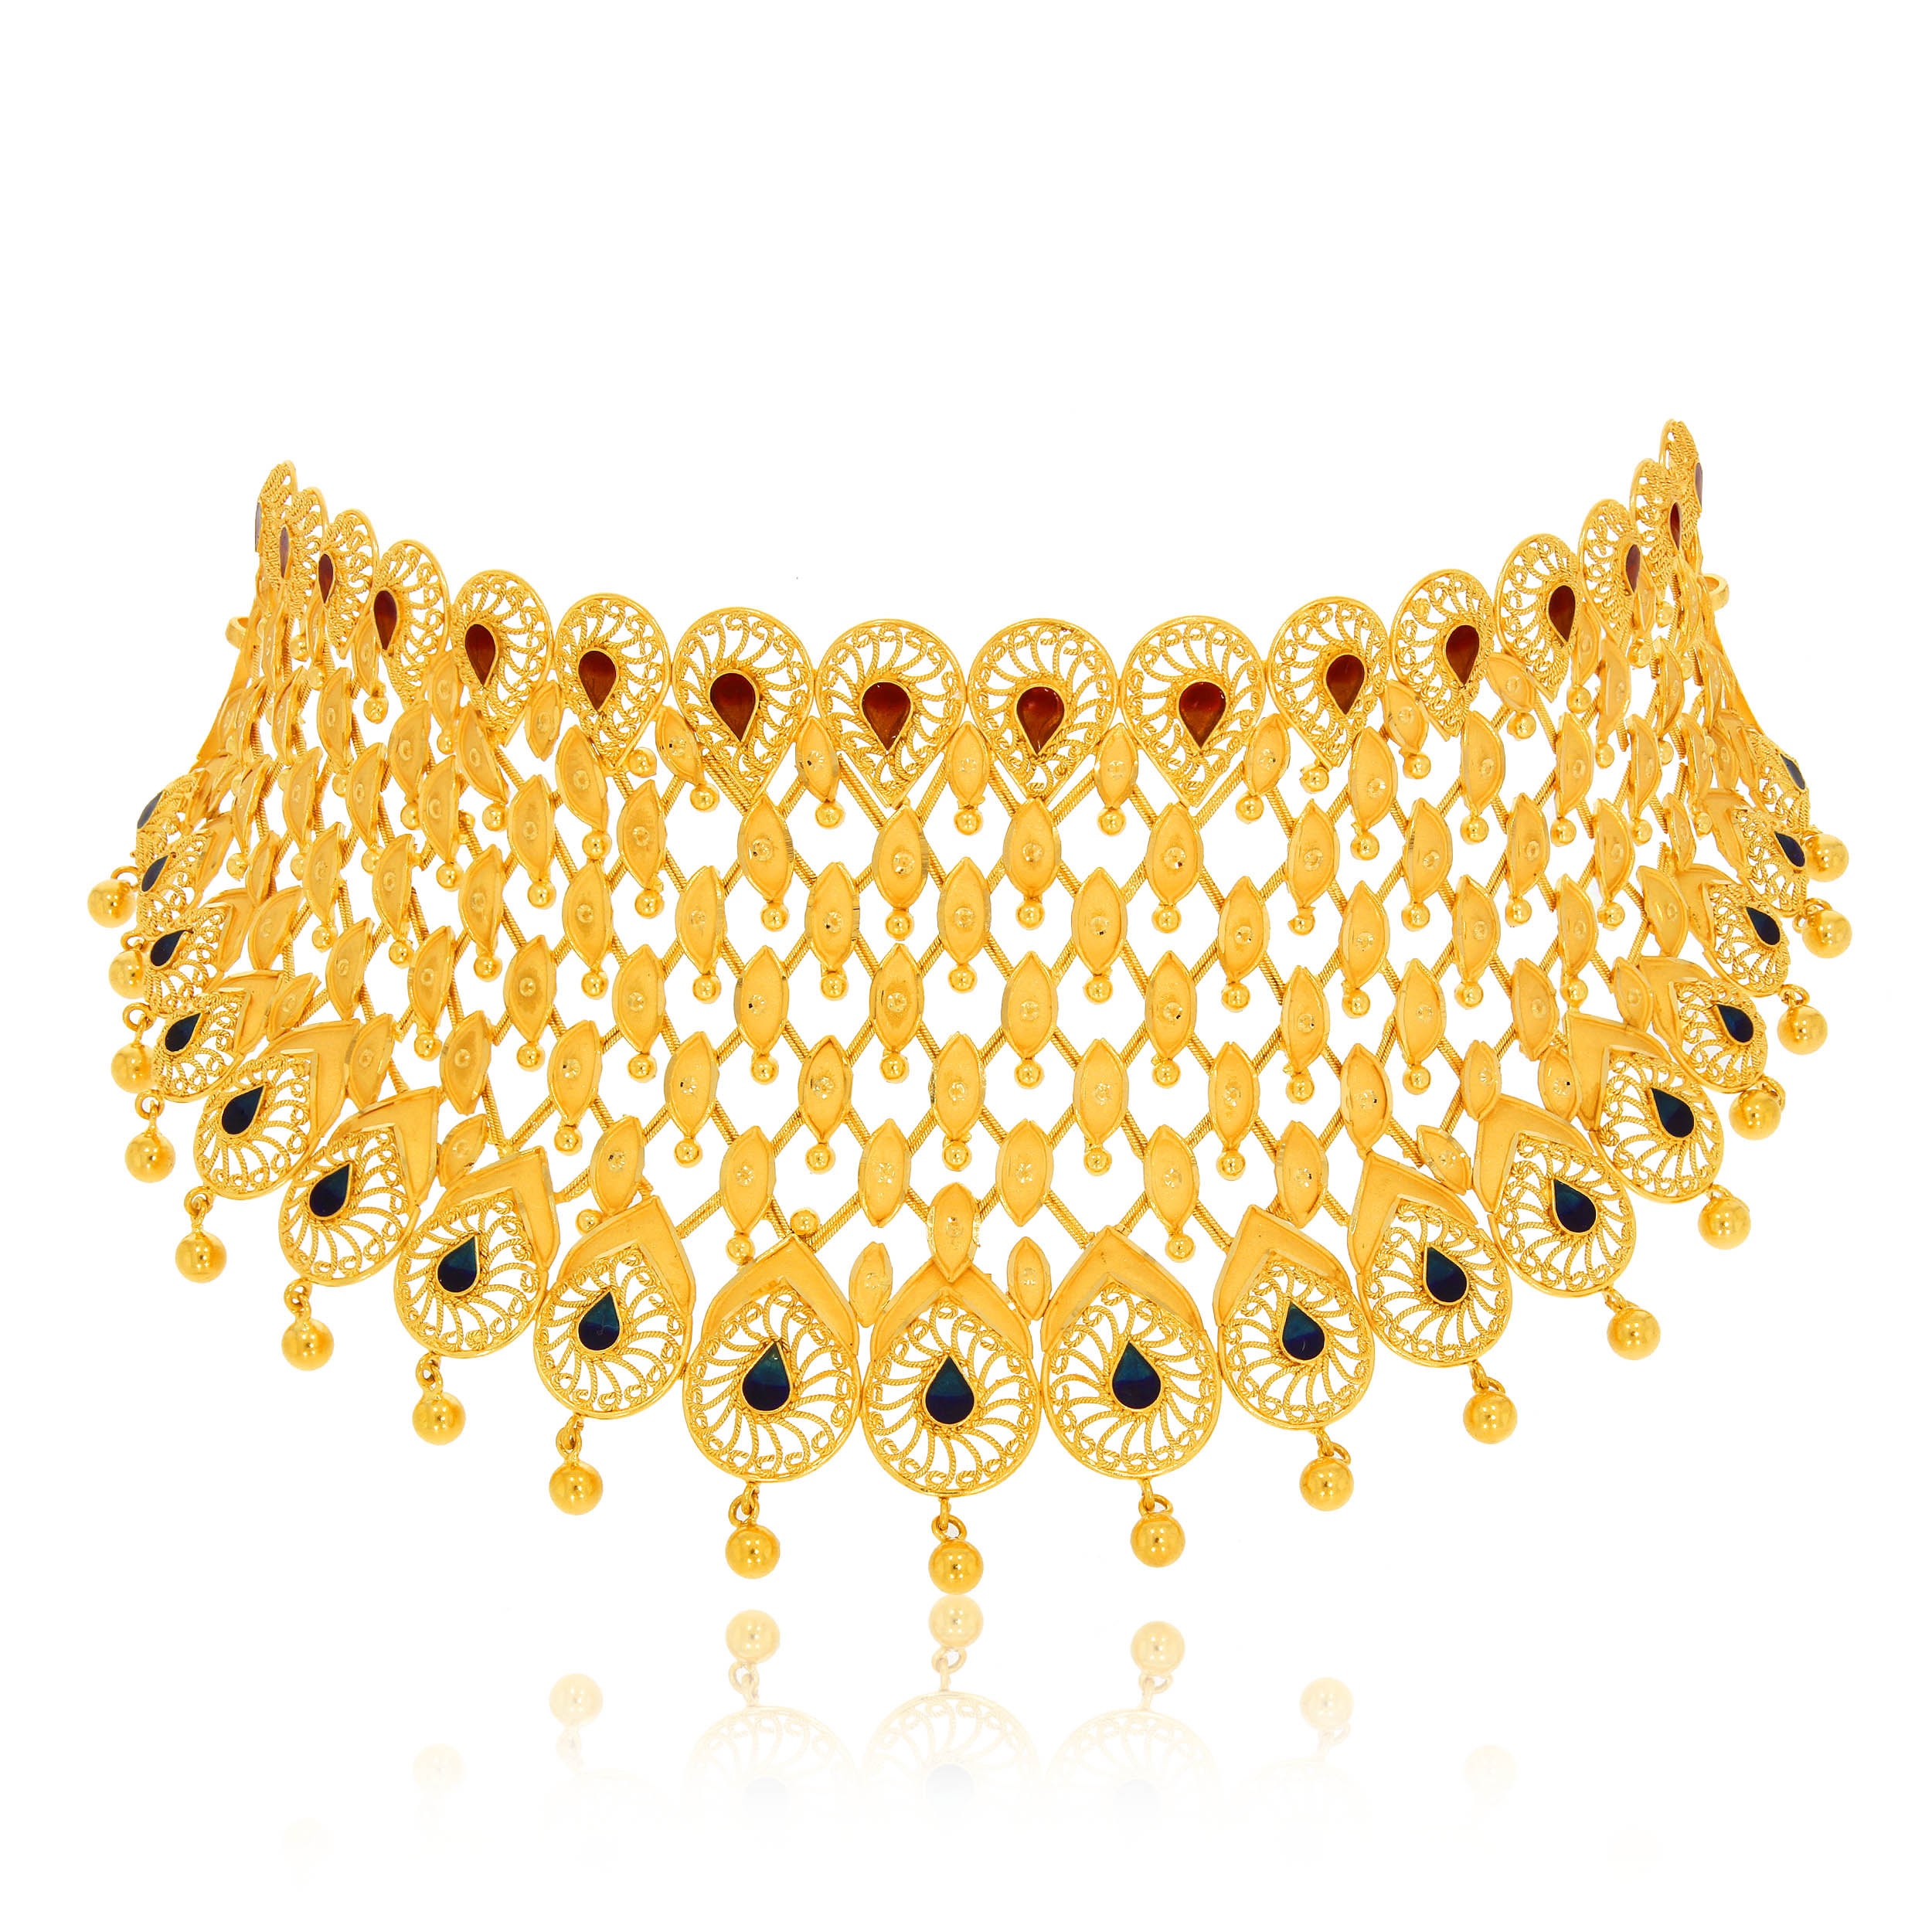 LAV AABI JEWELS 22CT  BIS HALLMARK GOLD  NECKLACE FOR  WOMEN